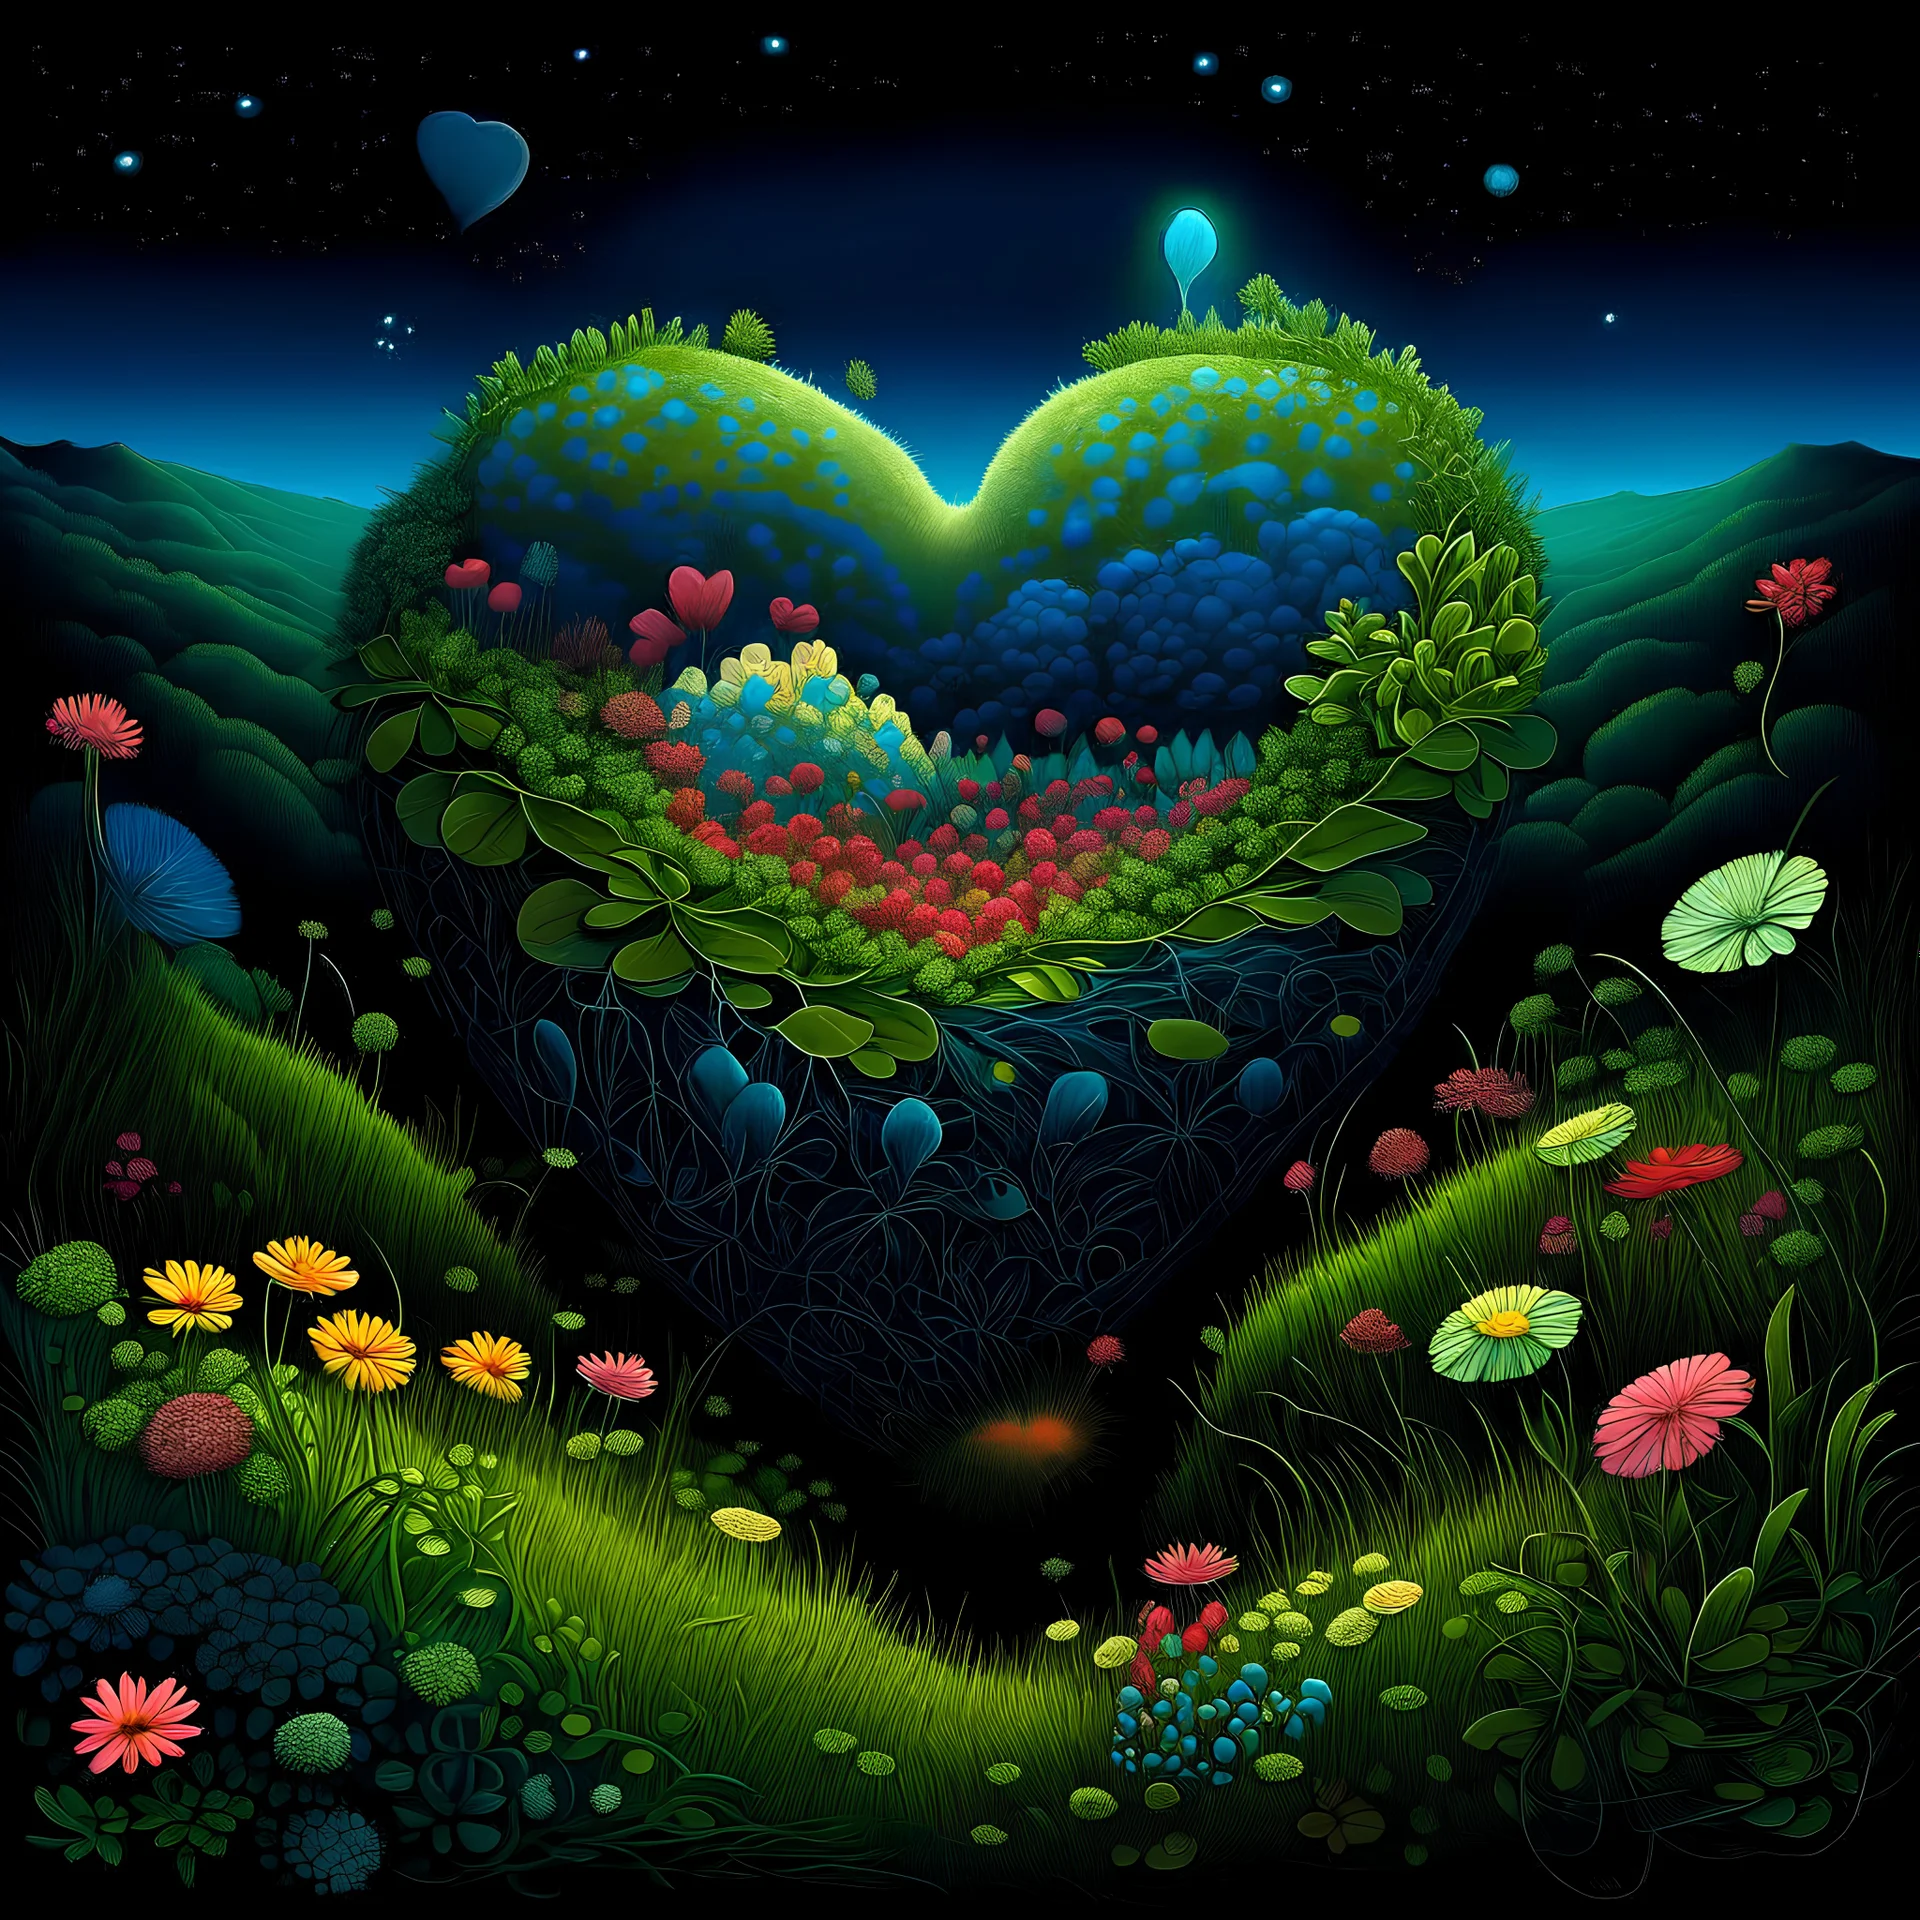 Jacek Yerki's fractals of wildflowers and hearts in the night. a clear image. digital painting. elegant. bright, colorful, 3D. art deco, diamond dust, extremely detailed. fantastic. dynamic lighting. excellent quality. Jacek Yerka